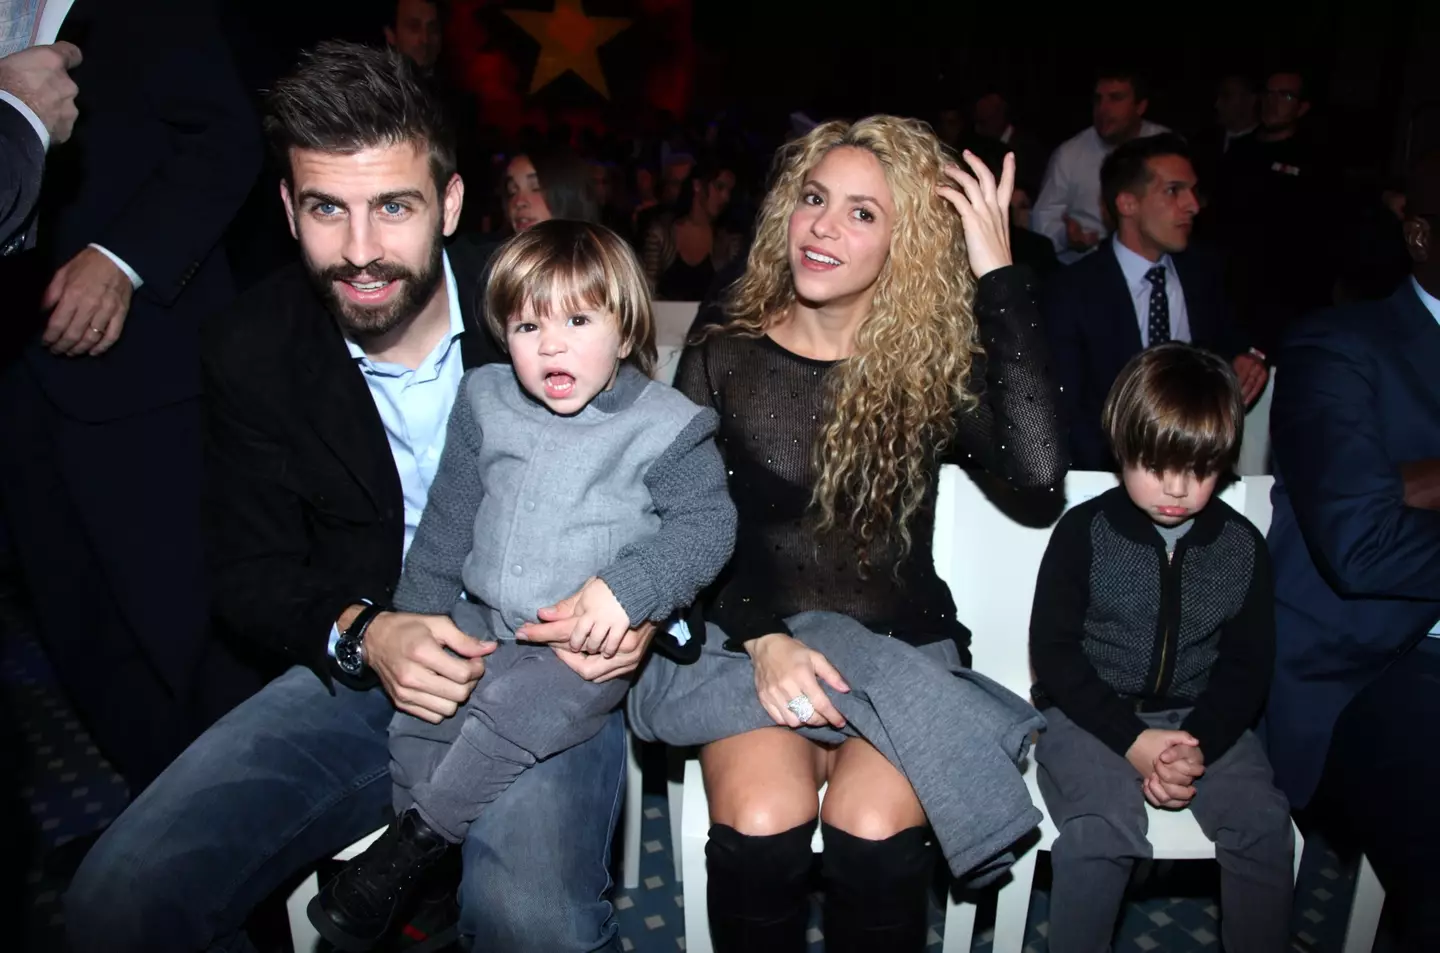 Shakira's agency asked for fans to 'respect' the family's 'privacy'.